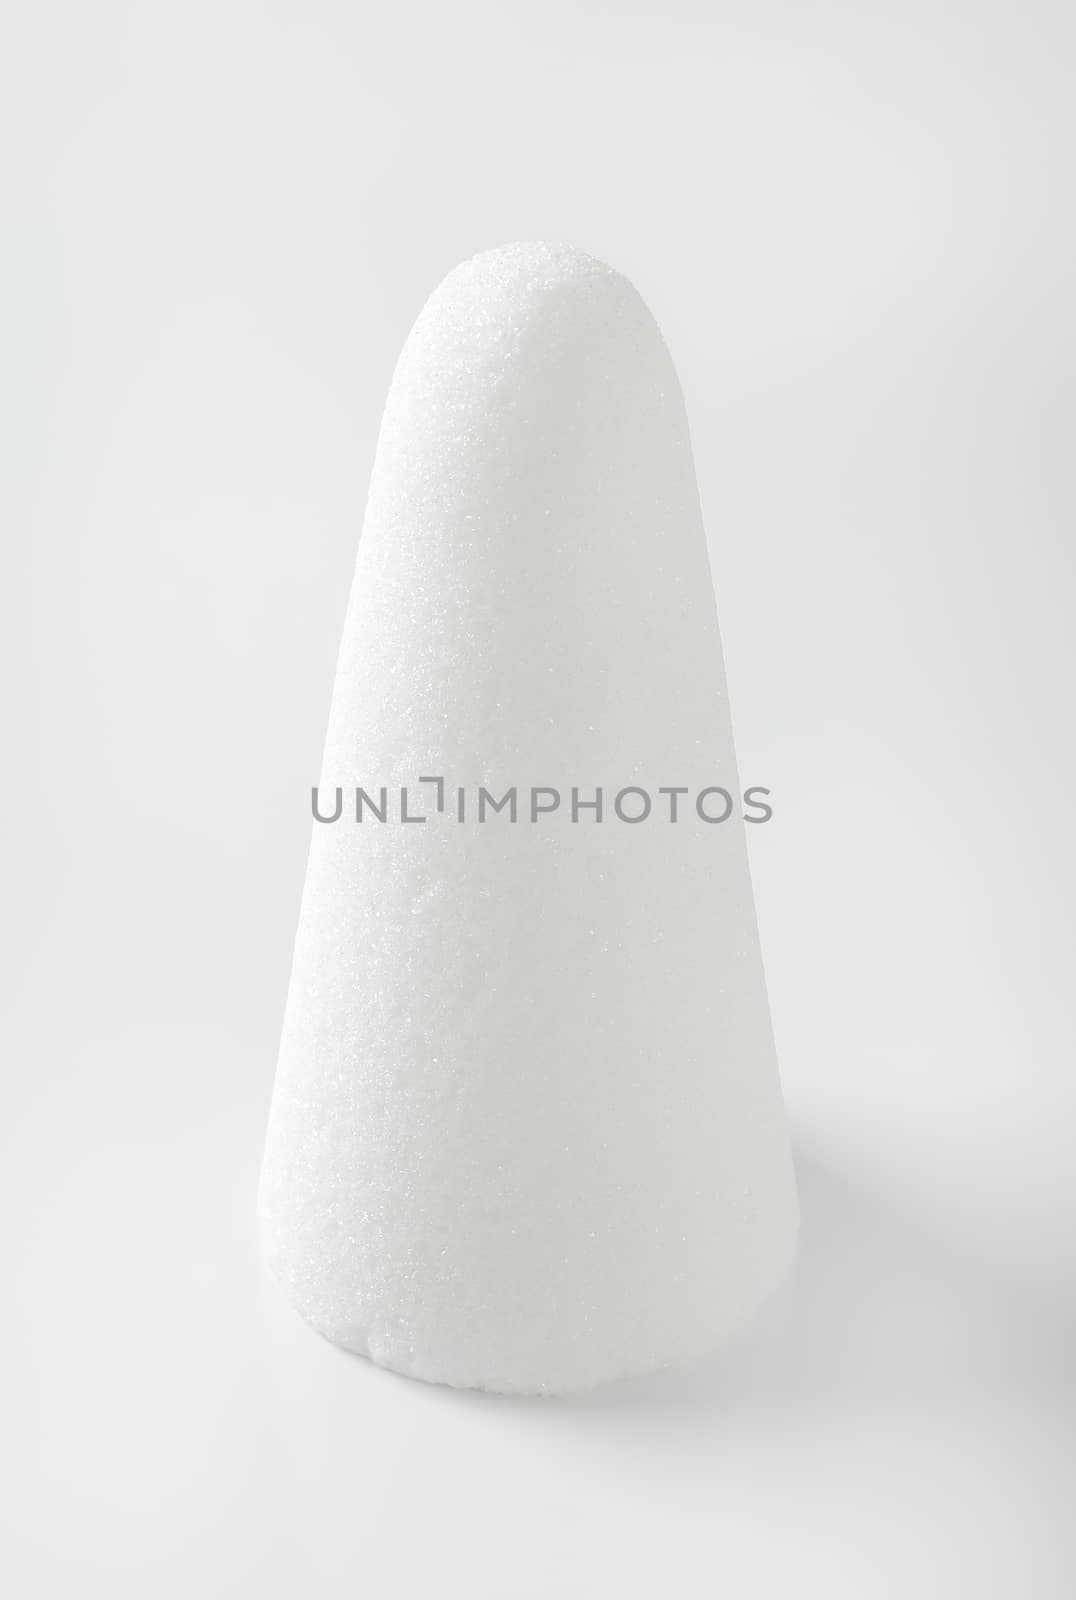 white sugar loaf or cone by Digifoodstock